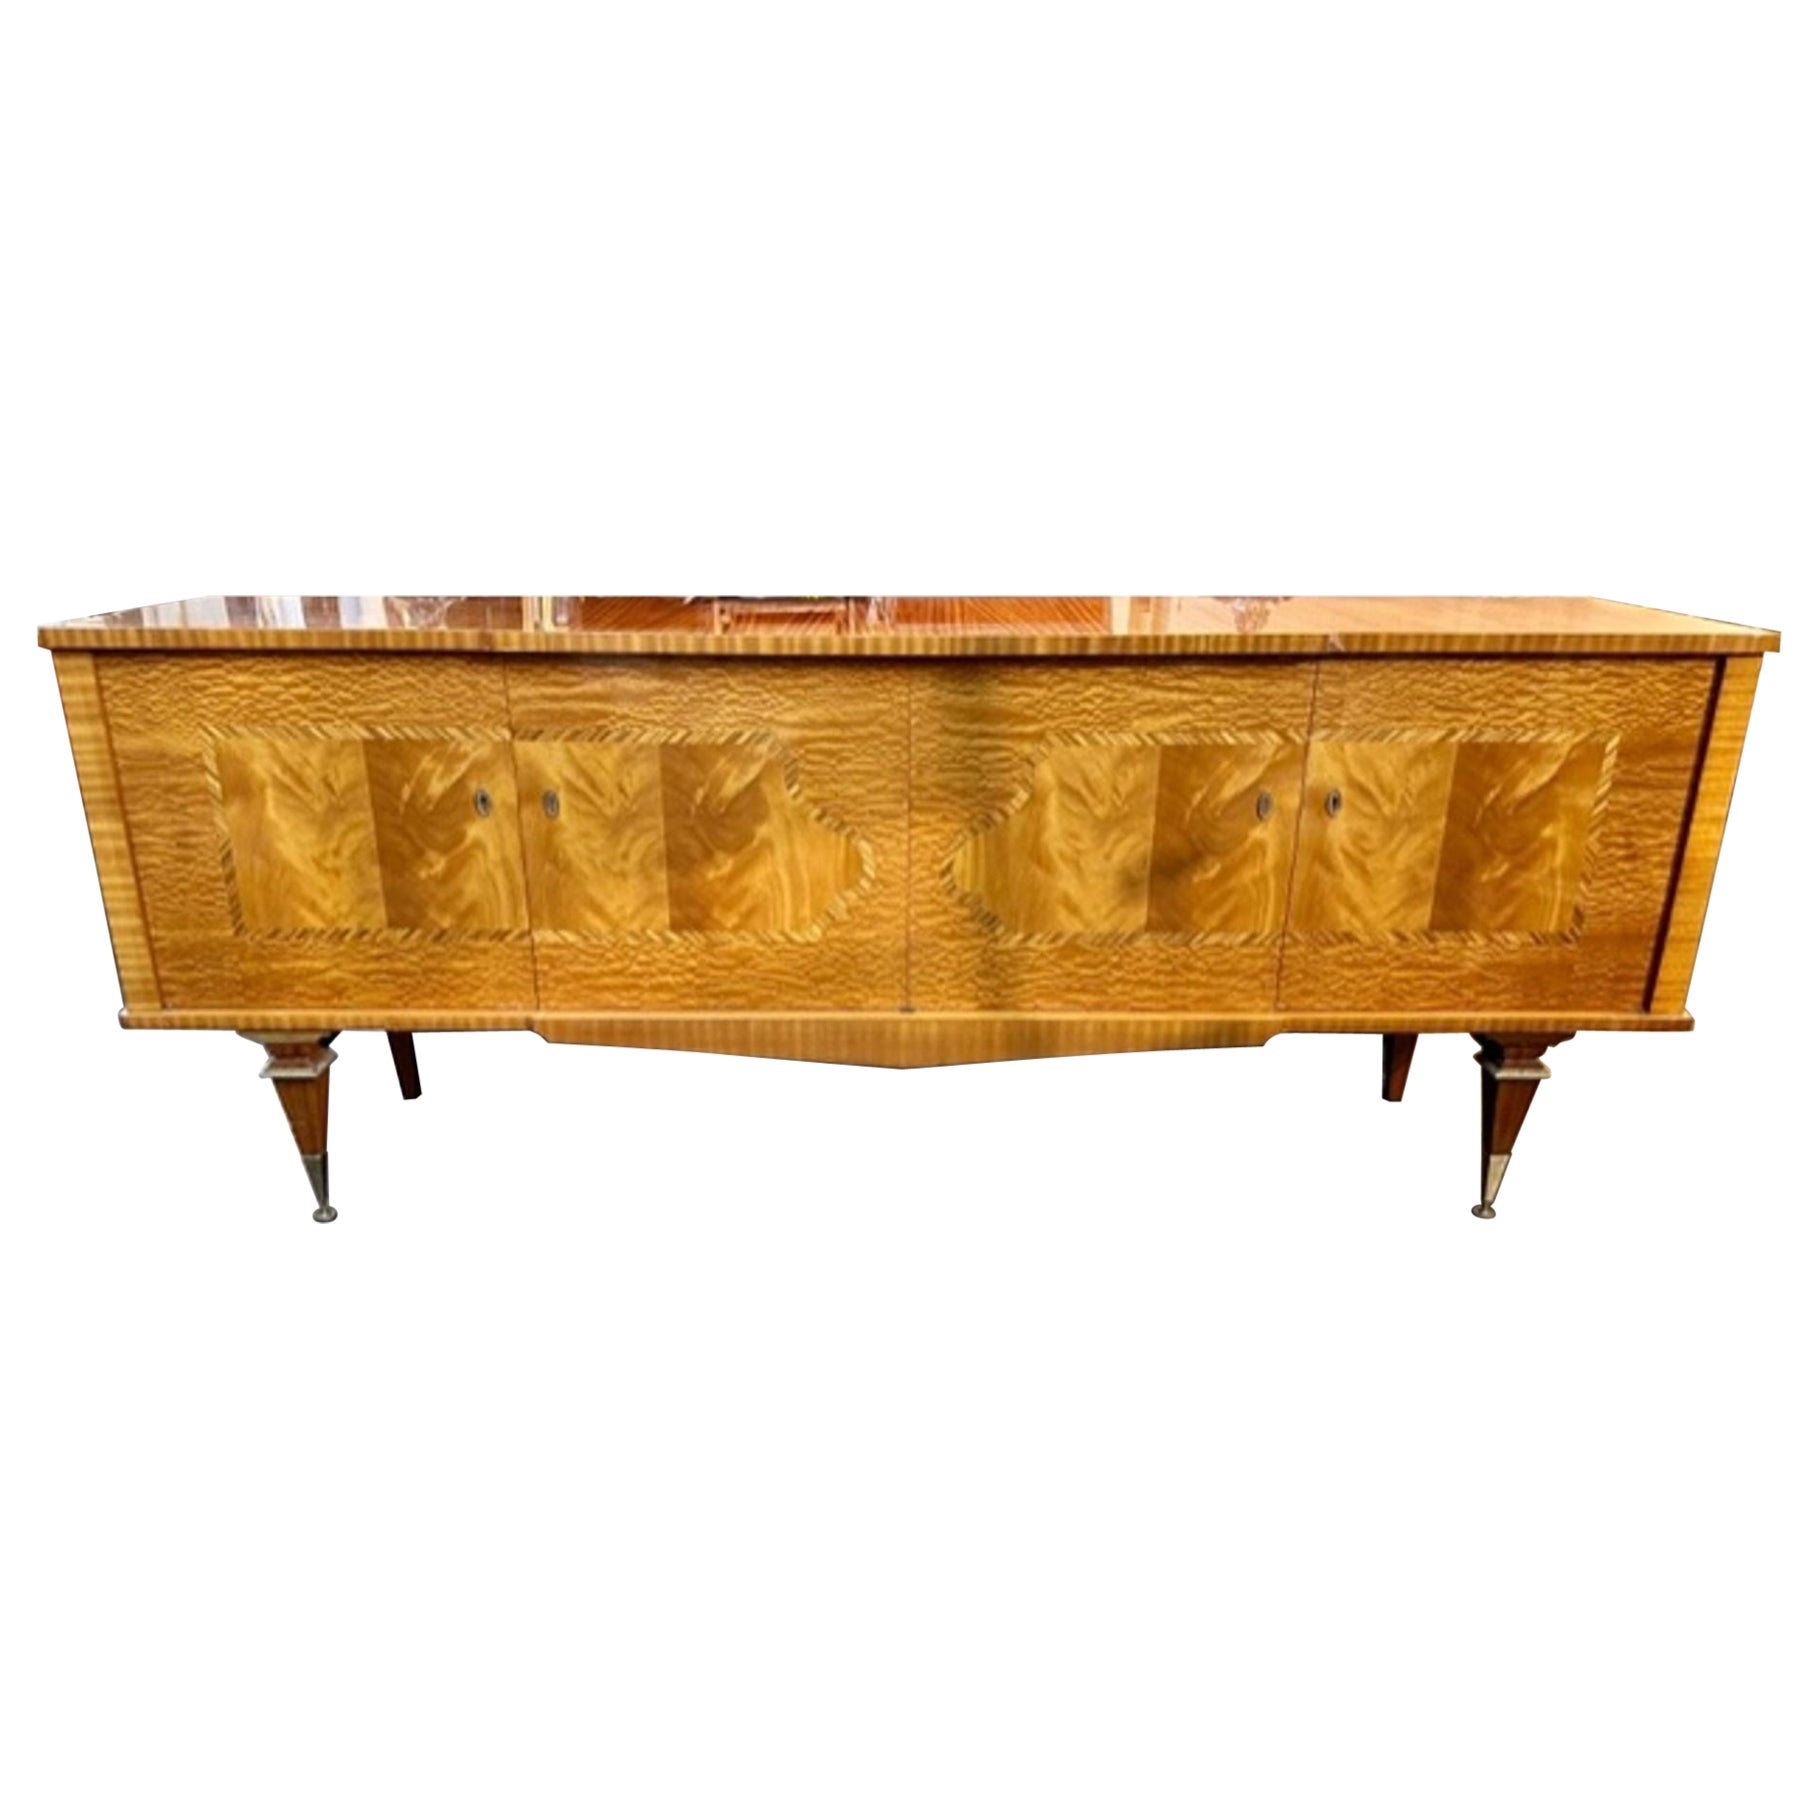 Large Scale Midcentury French Art Deco Style Side Board For Sale